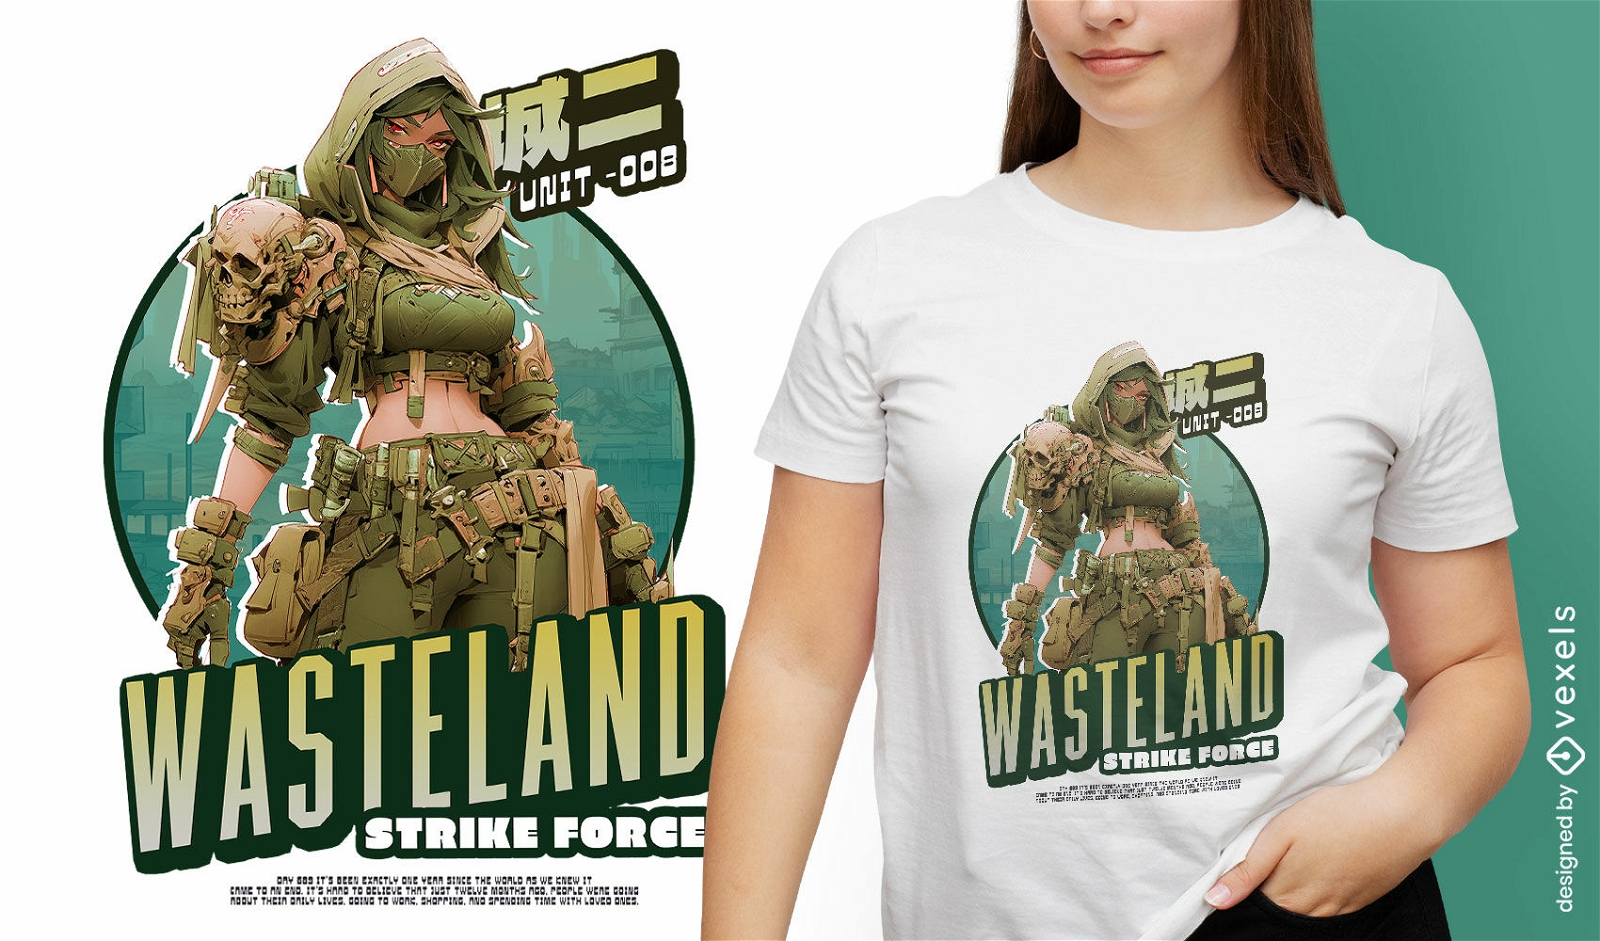 Anime-Armee-weibliches Dystopie-T-Shirt PSD